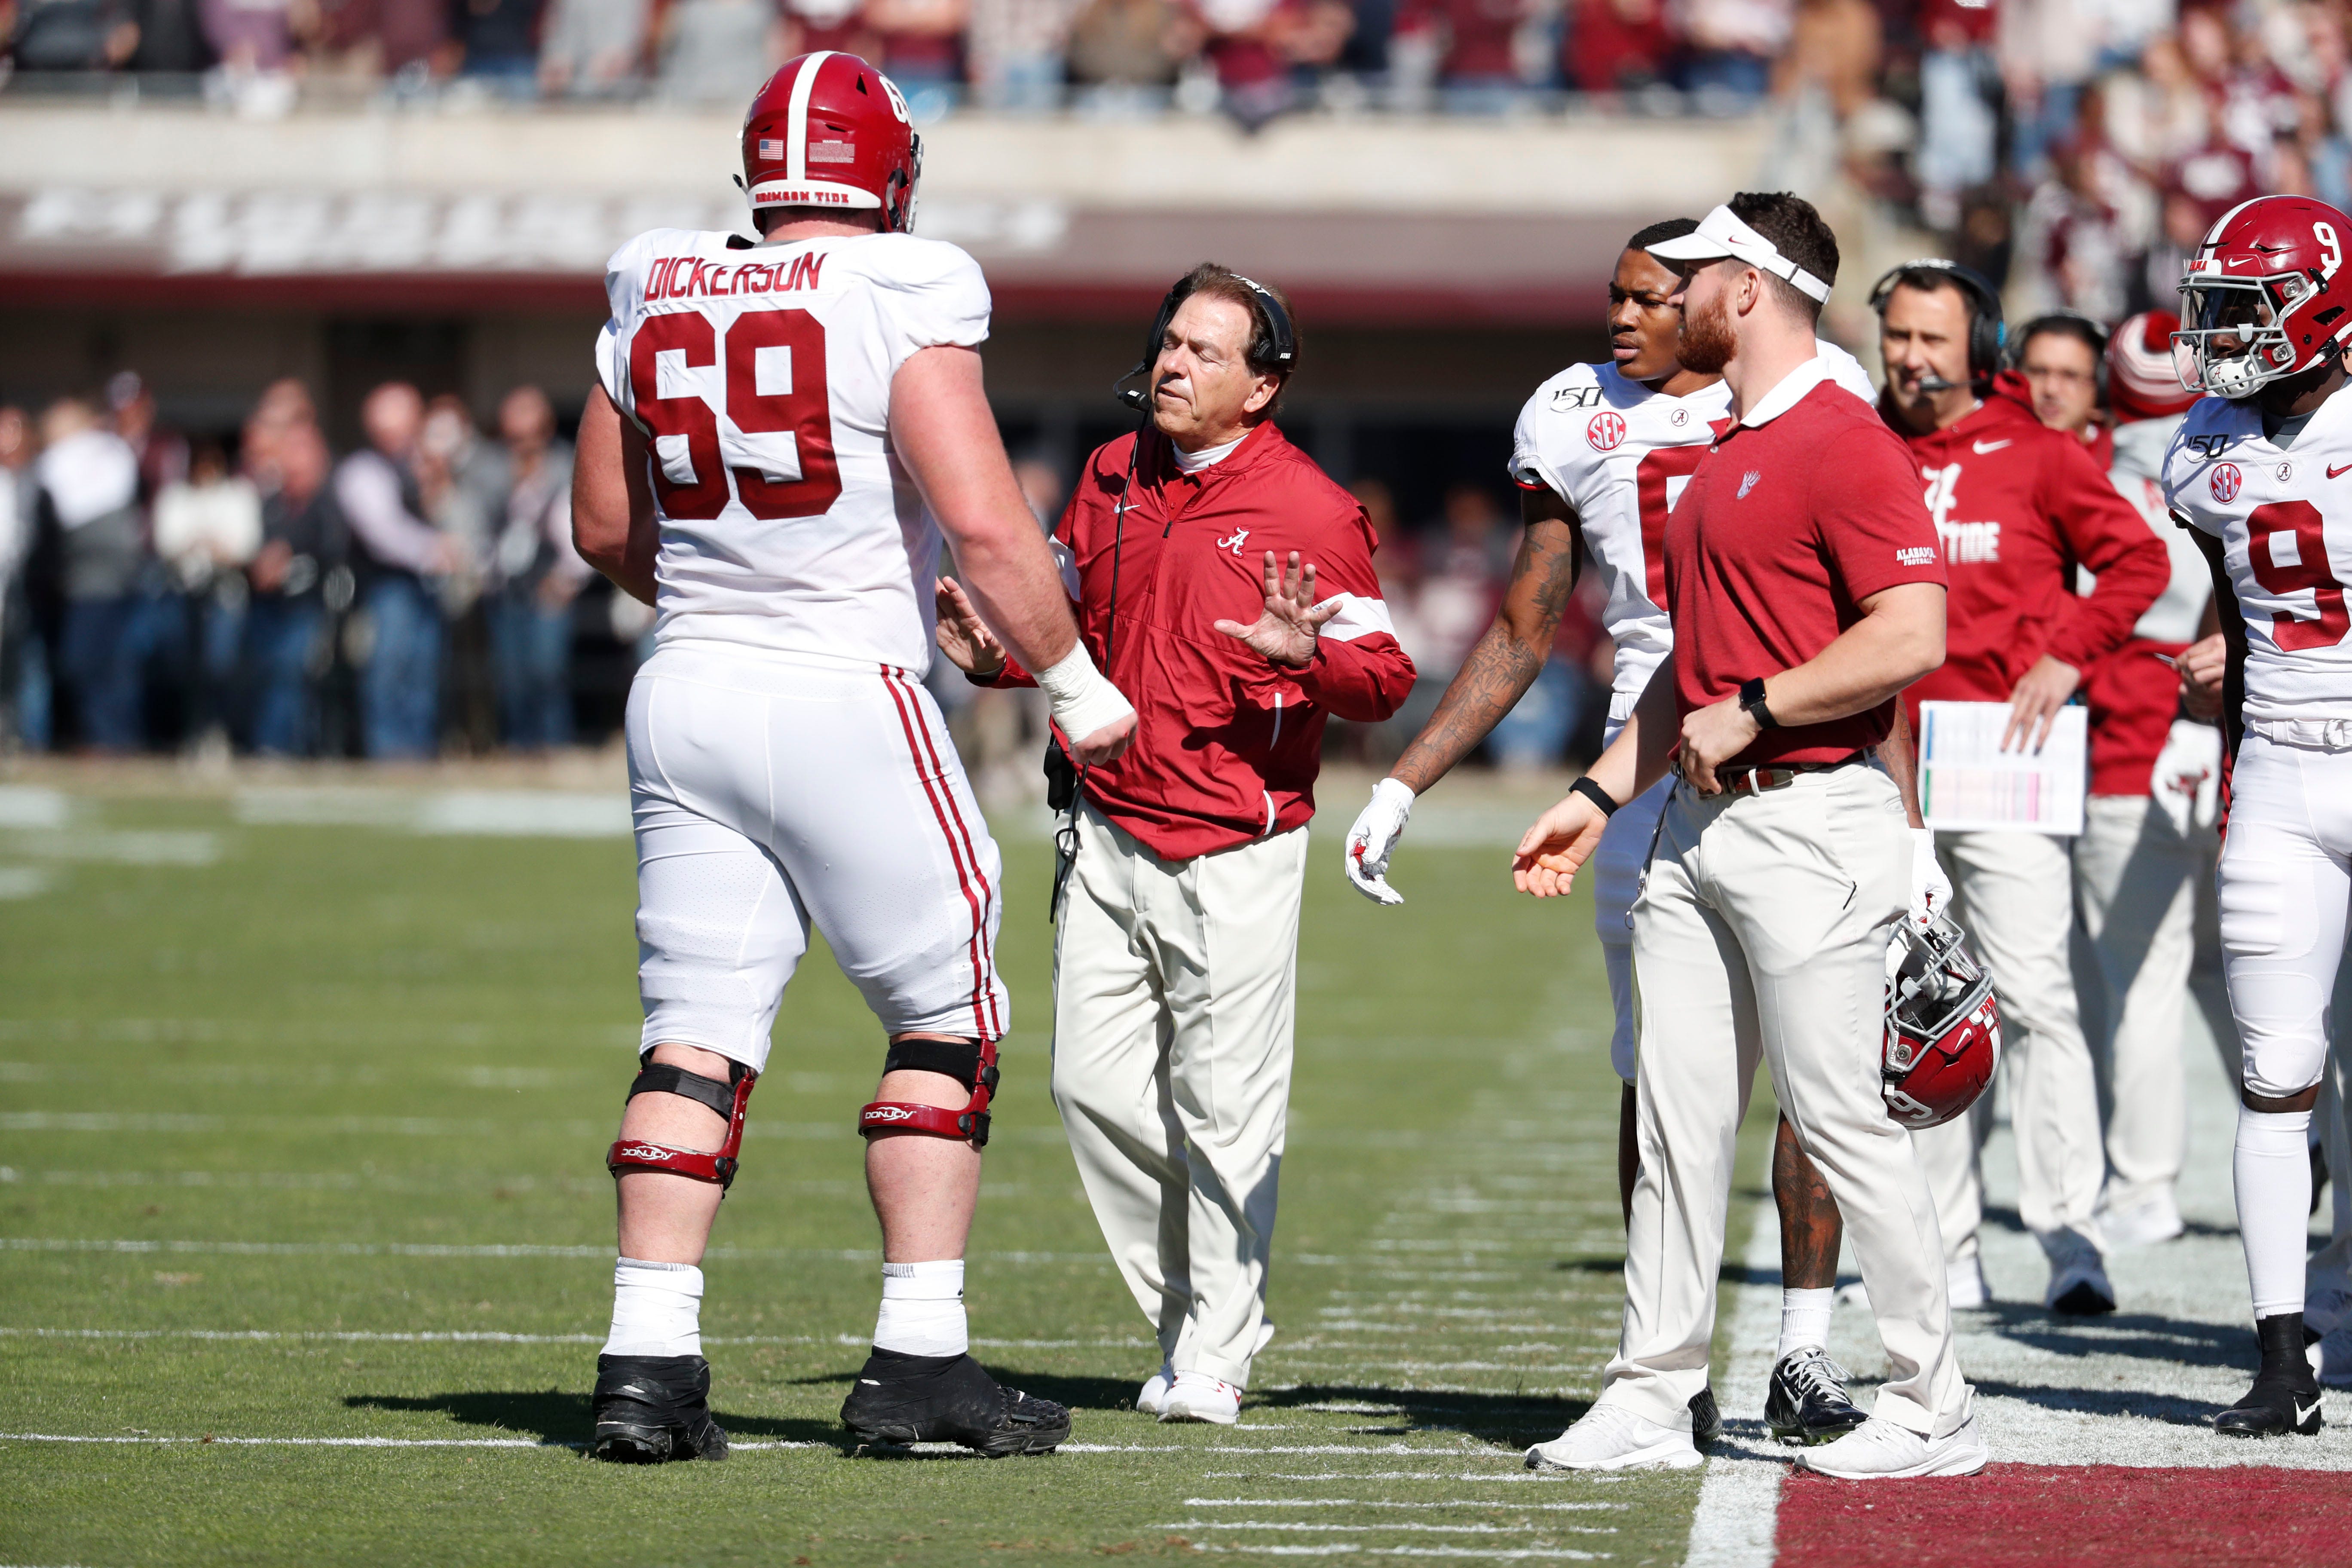 Alabama head coach Nick Saban confers with offensive lineman Landon Dickerson (69) during the first half of an NCAA college football game against Mississippi State in Starkville, Miss., Saturday, Nov. 16, 2019. Alabama won 38-7. (AP Photo/Rogelio V. Solis)